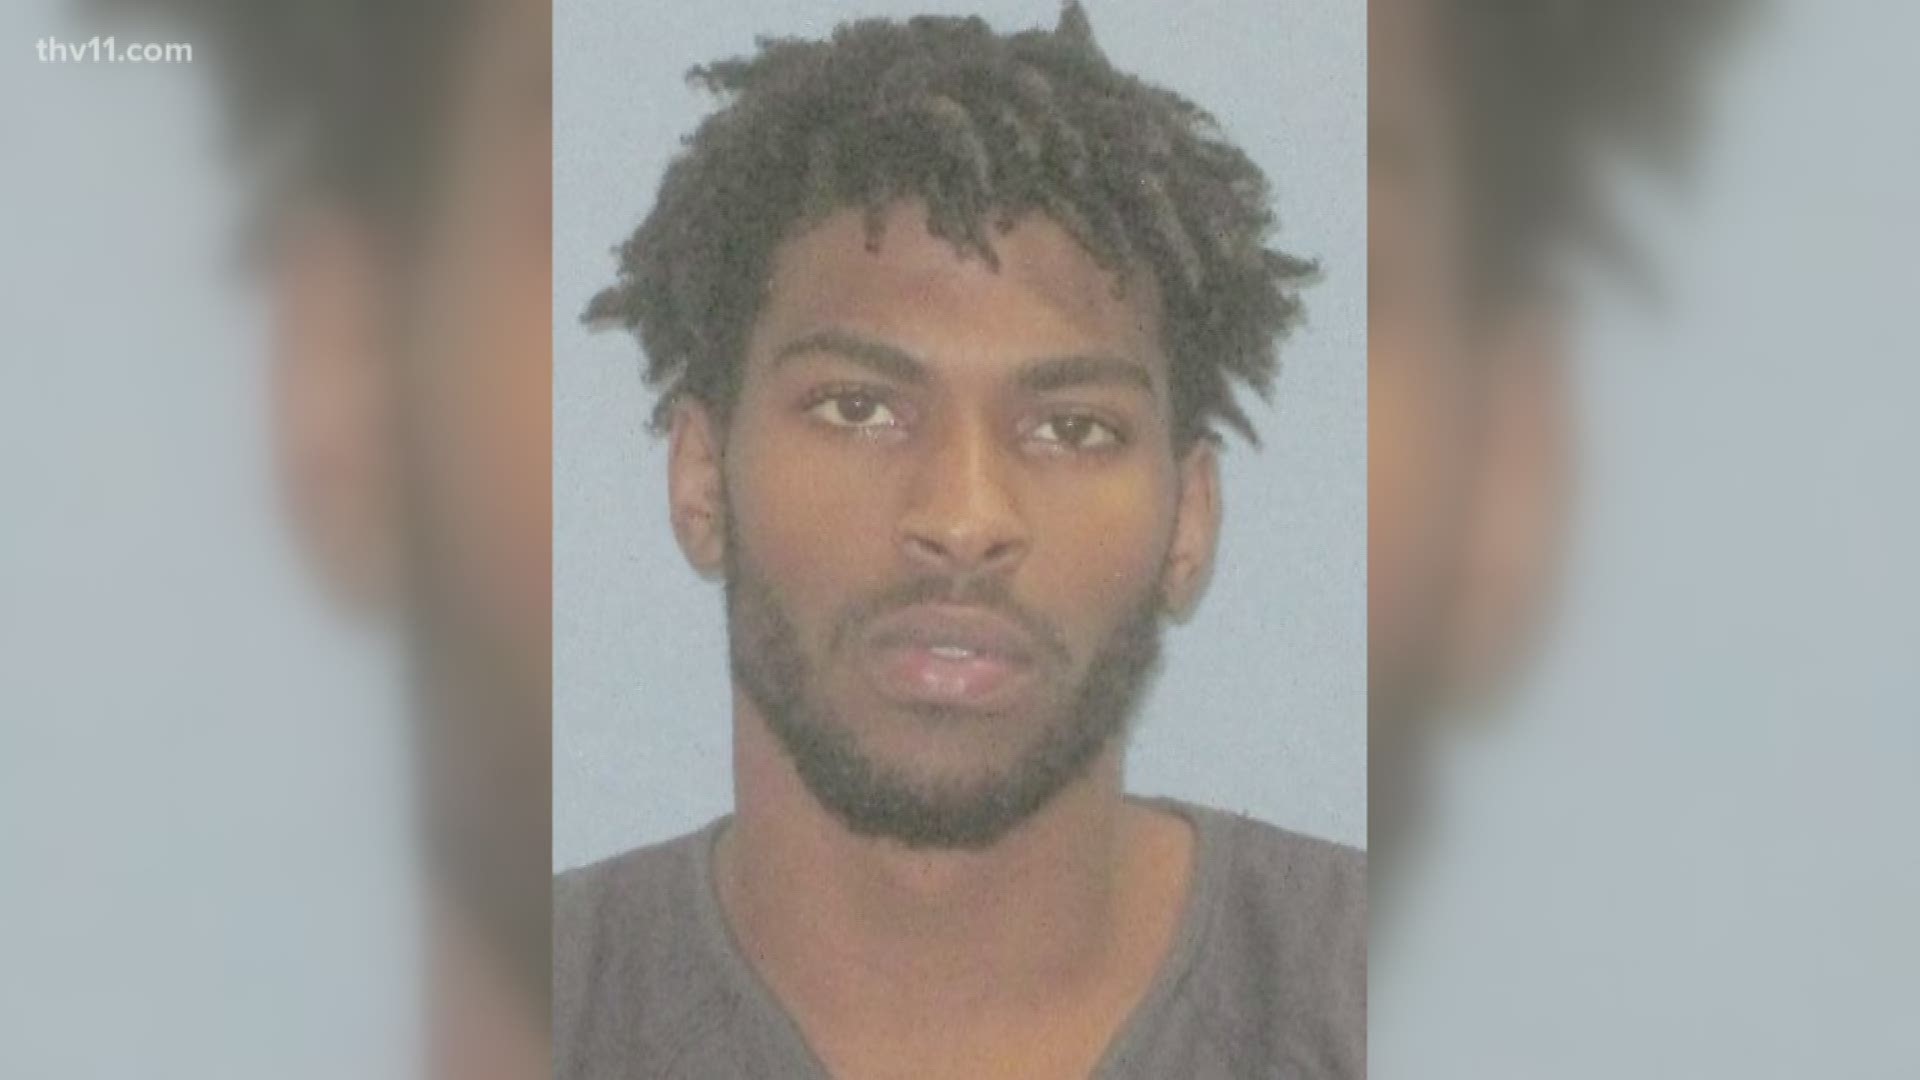 LITTLE ROCK POLICE HAVE A SUSPECT IN CUSTODY - IN CONNECTION TO A SHOOTING THAT HAPPENED EARLY THURSDAY MORNING